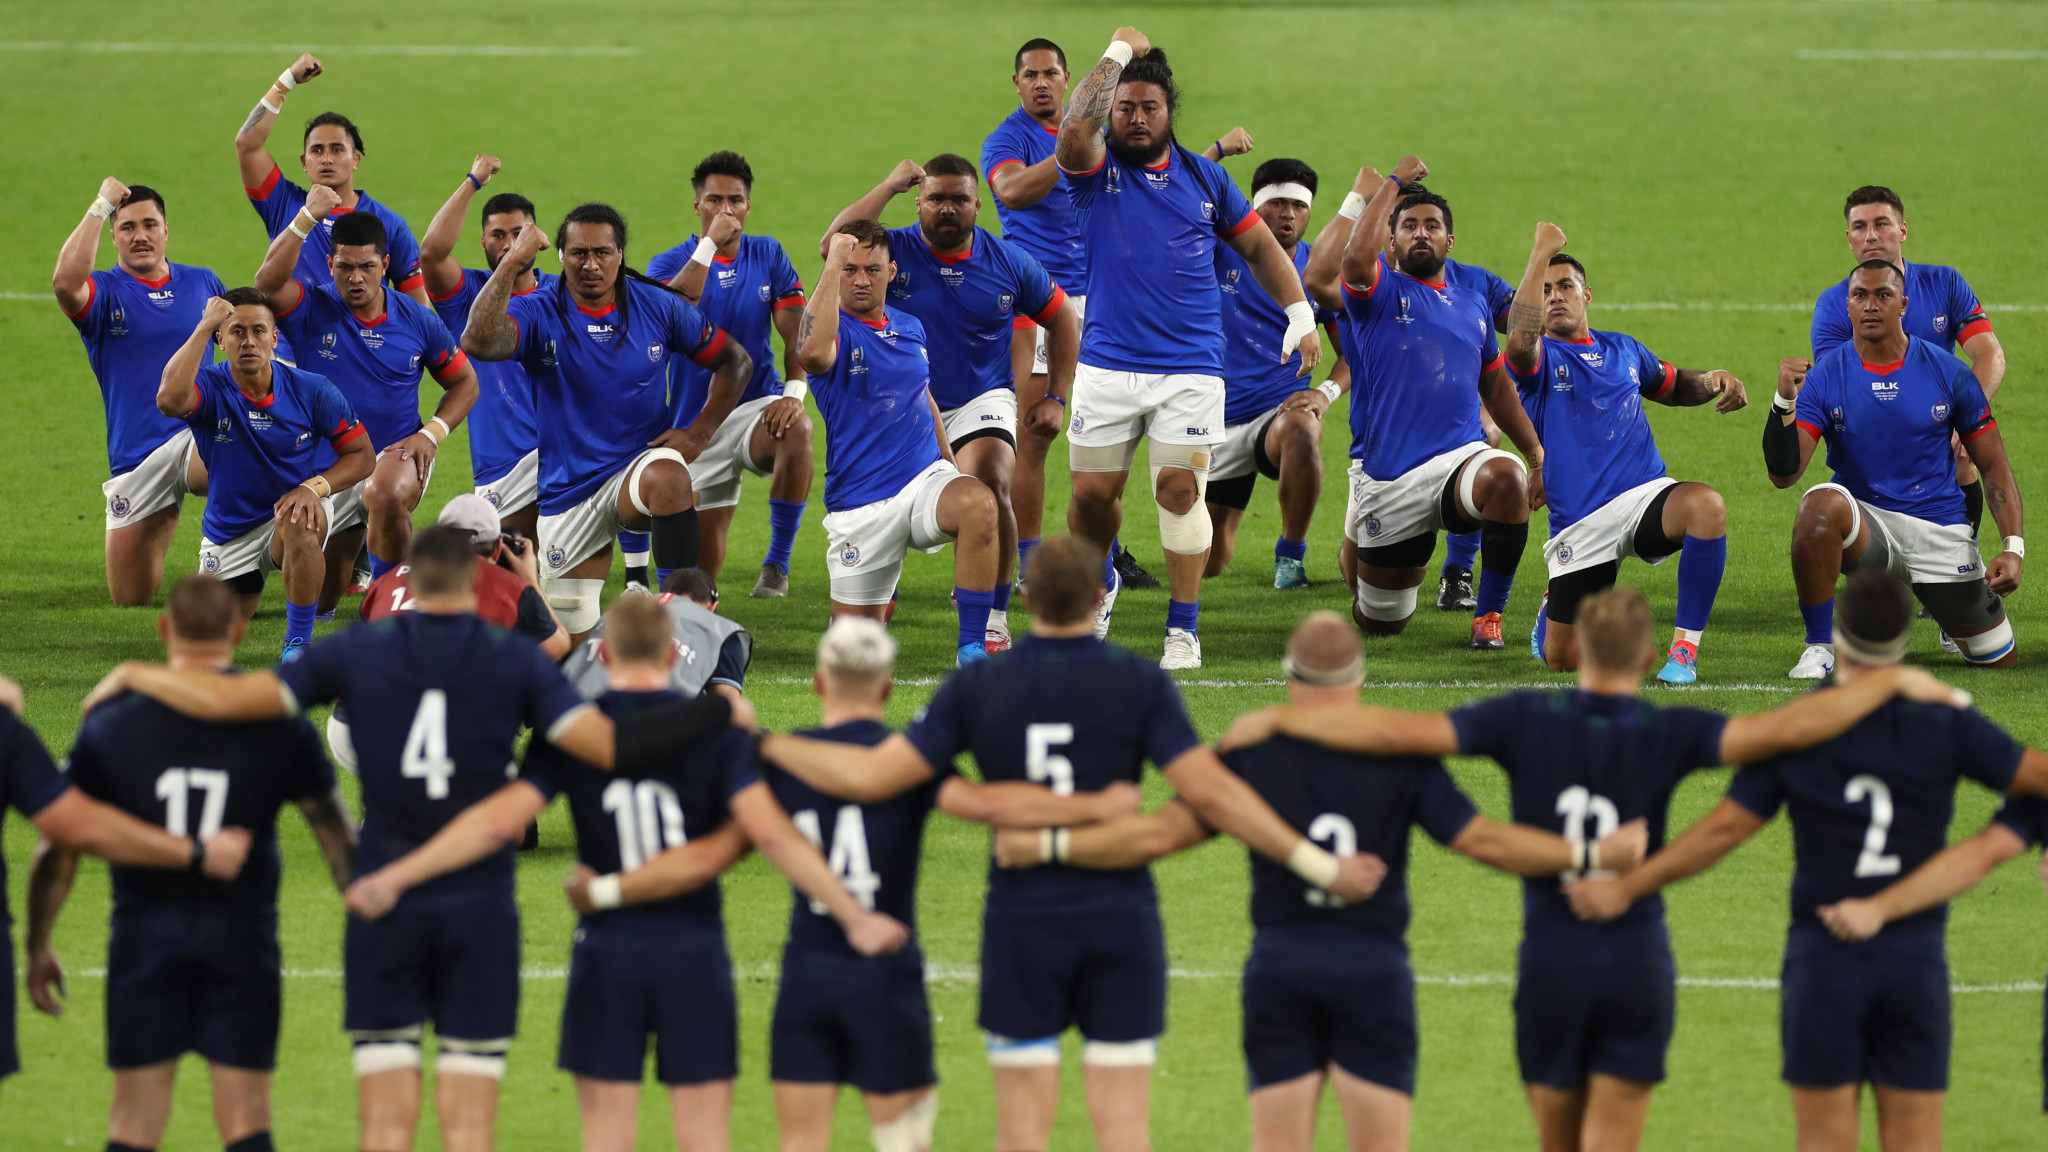 Samoa performed the Siva Tau war dance before the game ©Getty Images